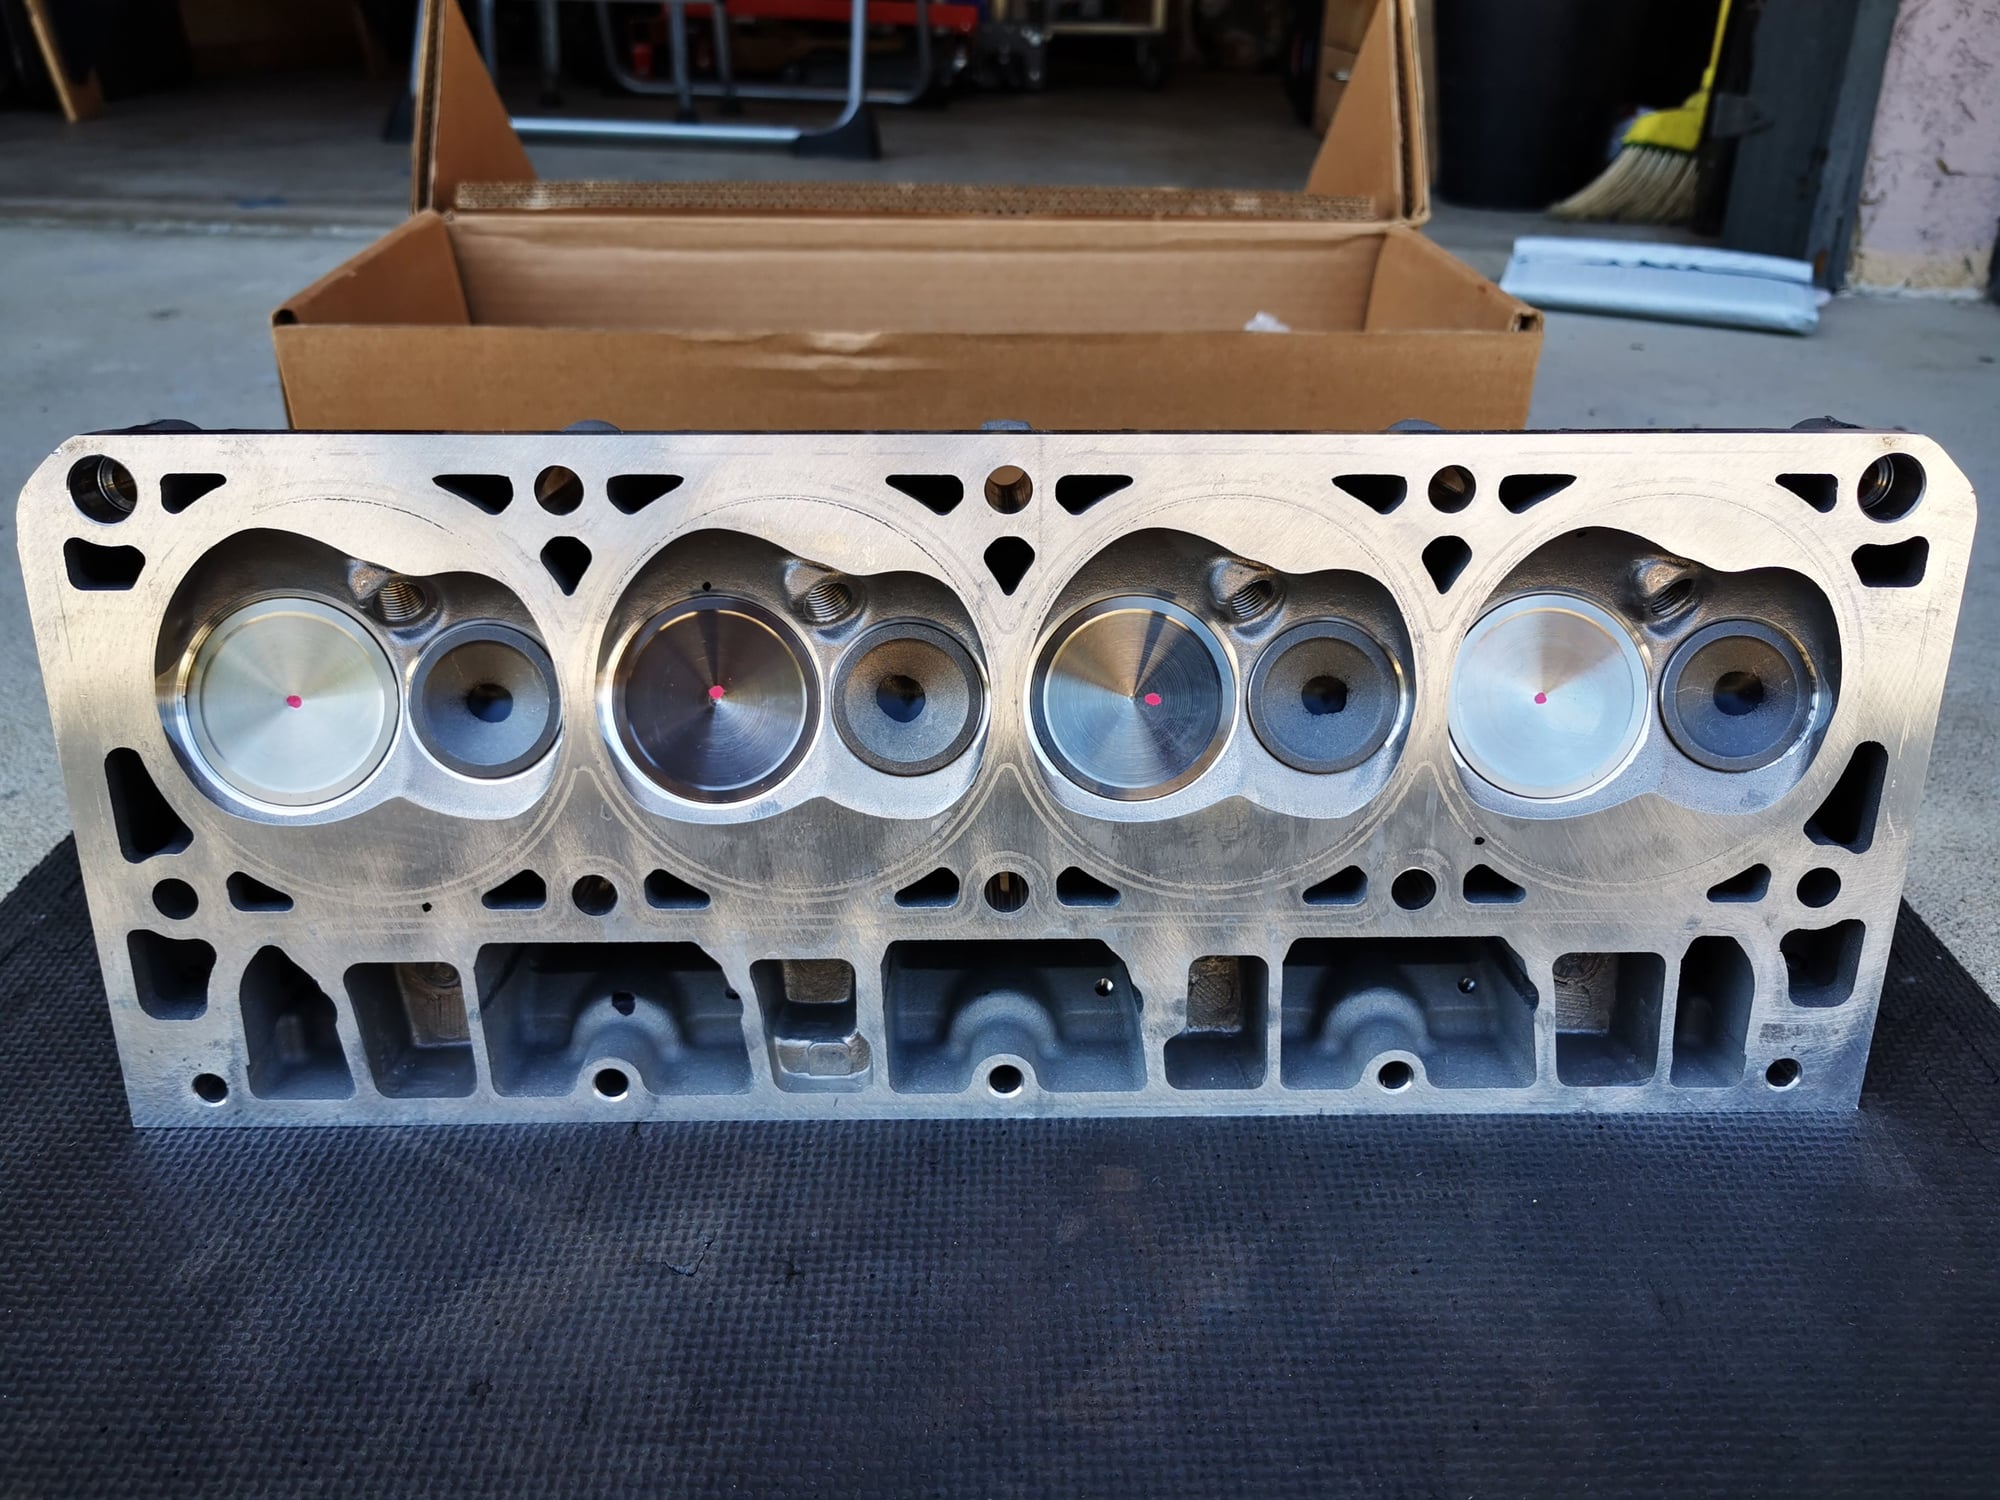 Engine - Internals - LS3 Cylinder Heads [0821], New [x2] - New - 2008 to 2013 Chevrolet Corvette - South Pasadena, CA 91030, United States